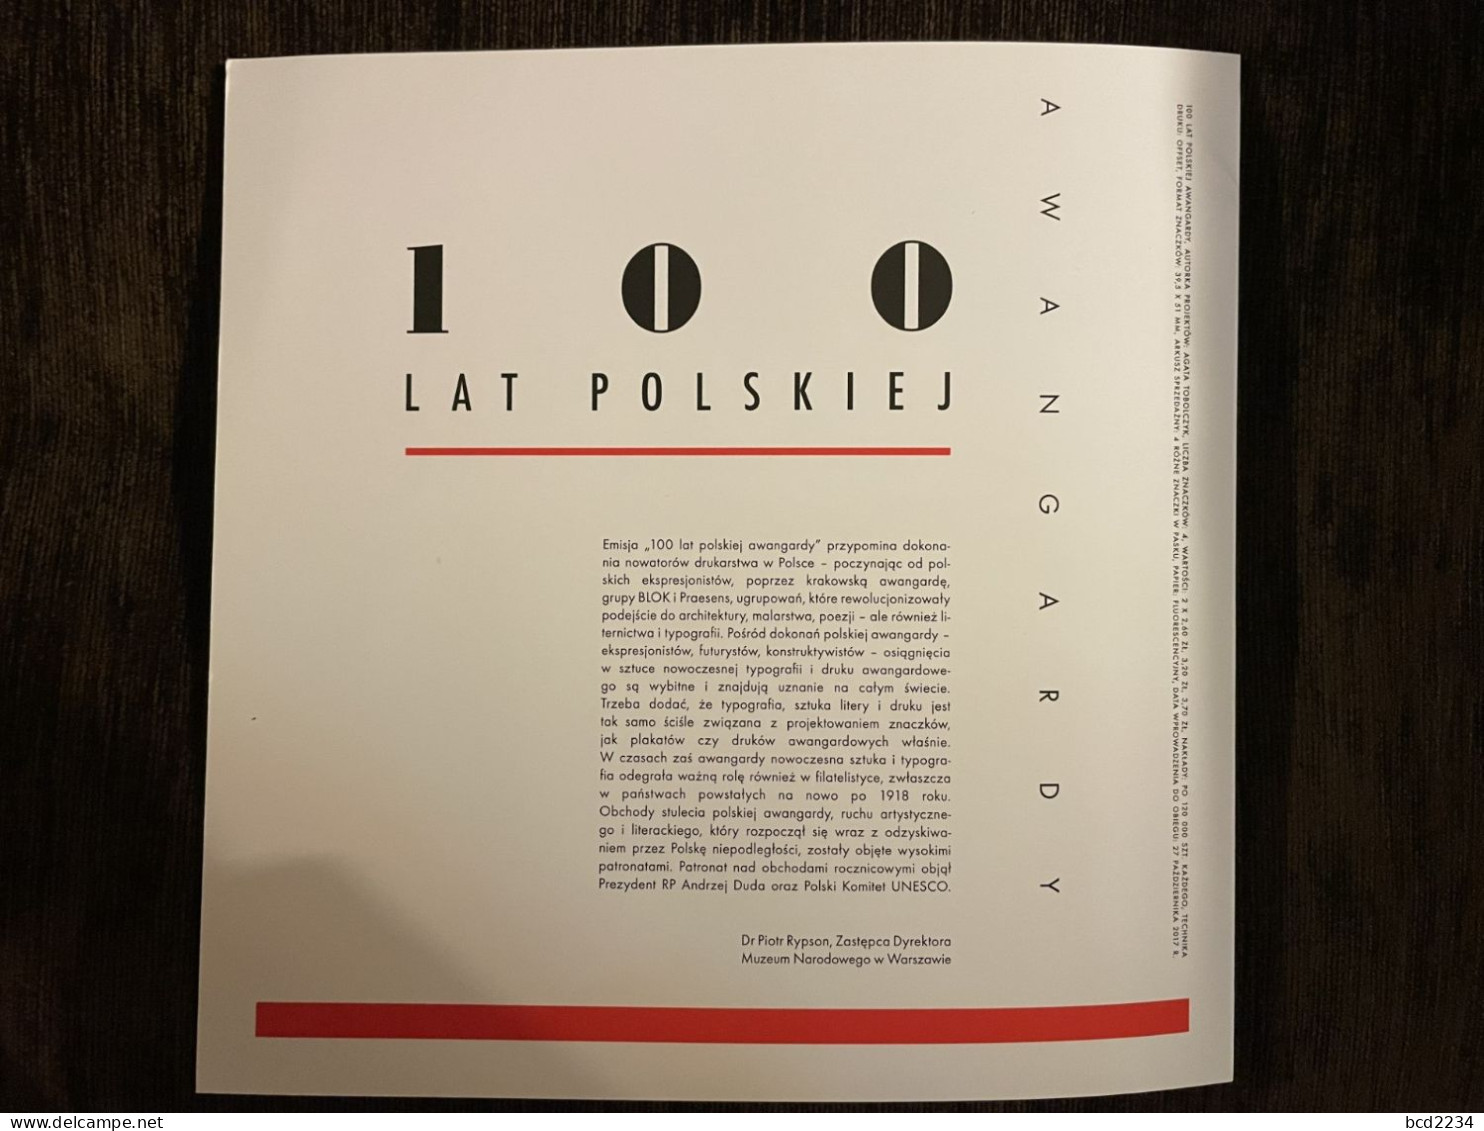 POLAND 2017 POLISH POST OFFICE SPECIAL LIMITED EDITION FOLDER: 100 YEARS OF POLISH AVANT-GUARD MS BLOK 310 ART ARTISTS - Covers & Documents